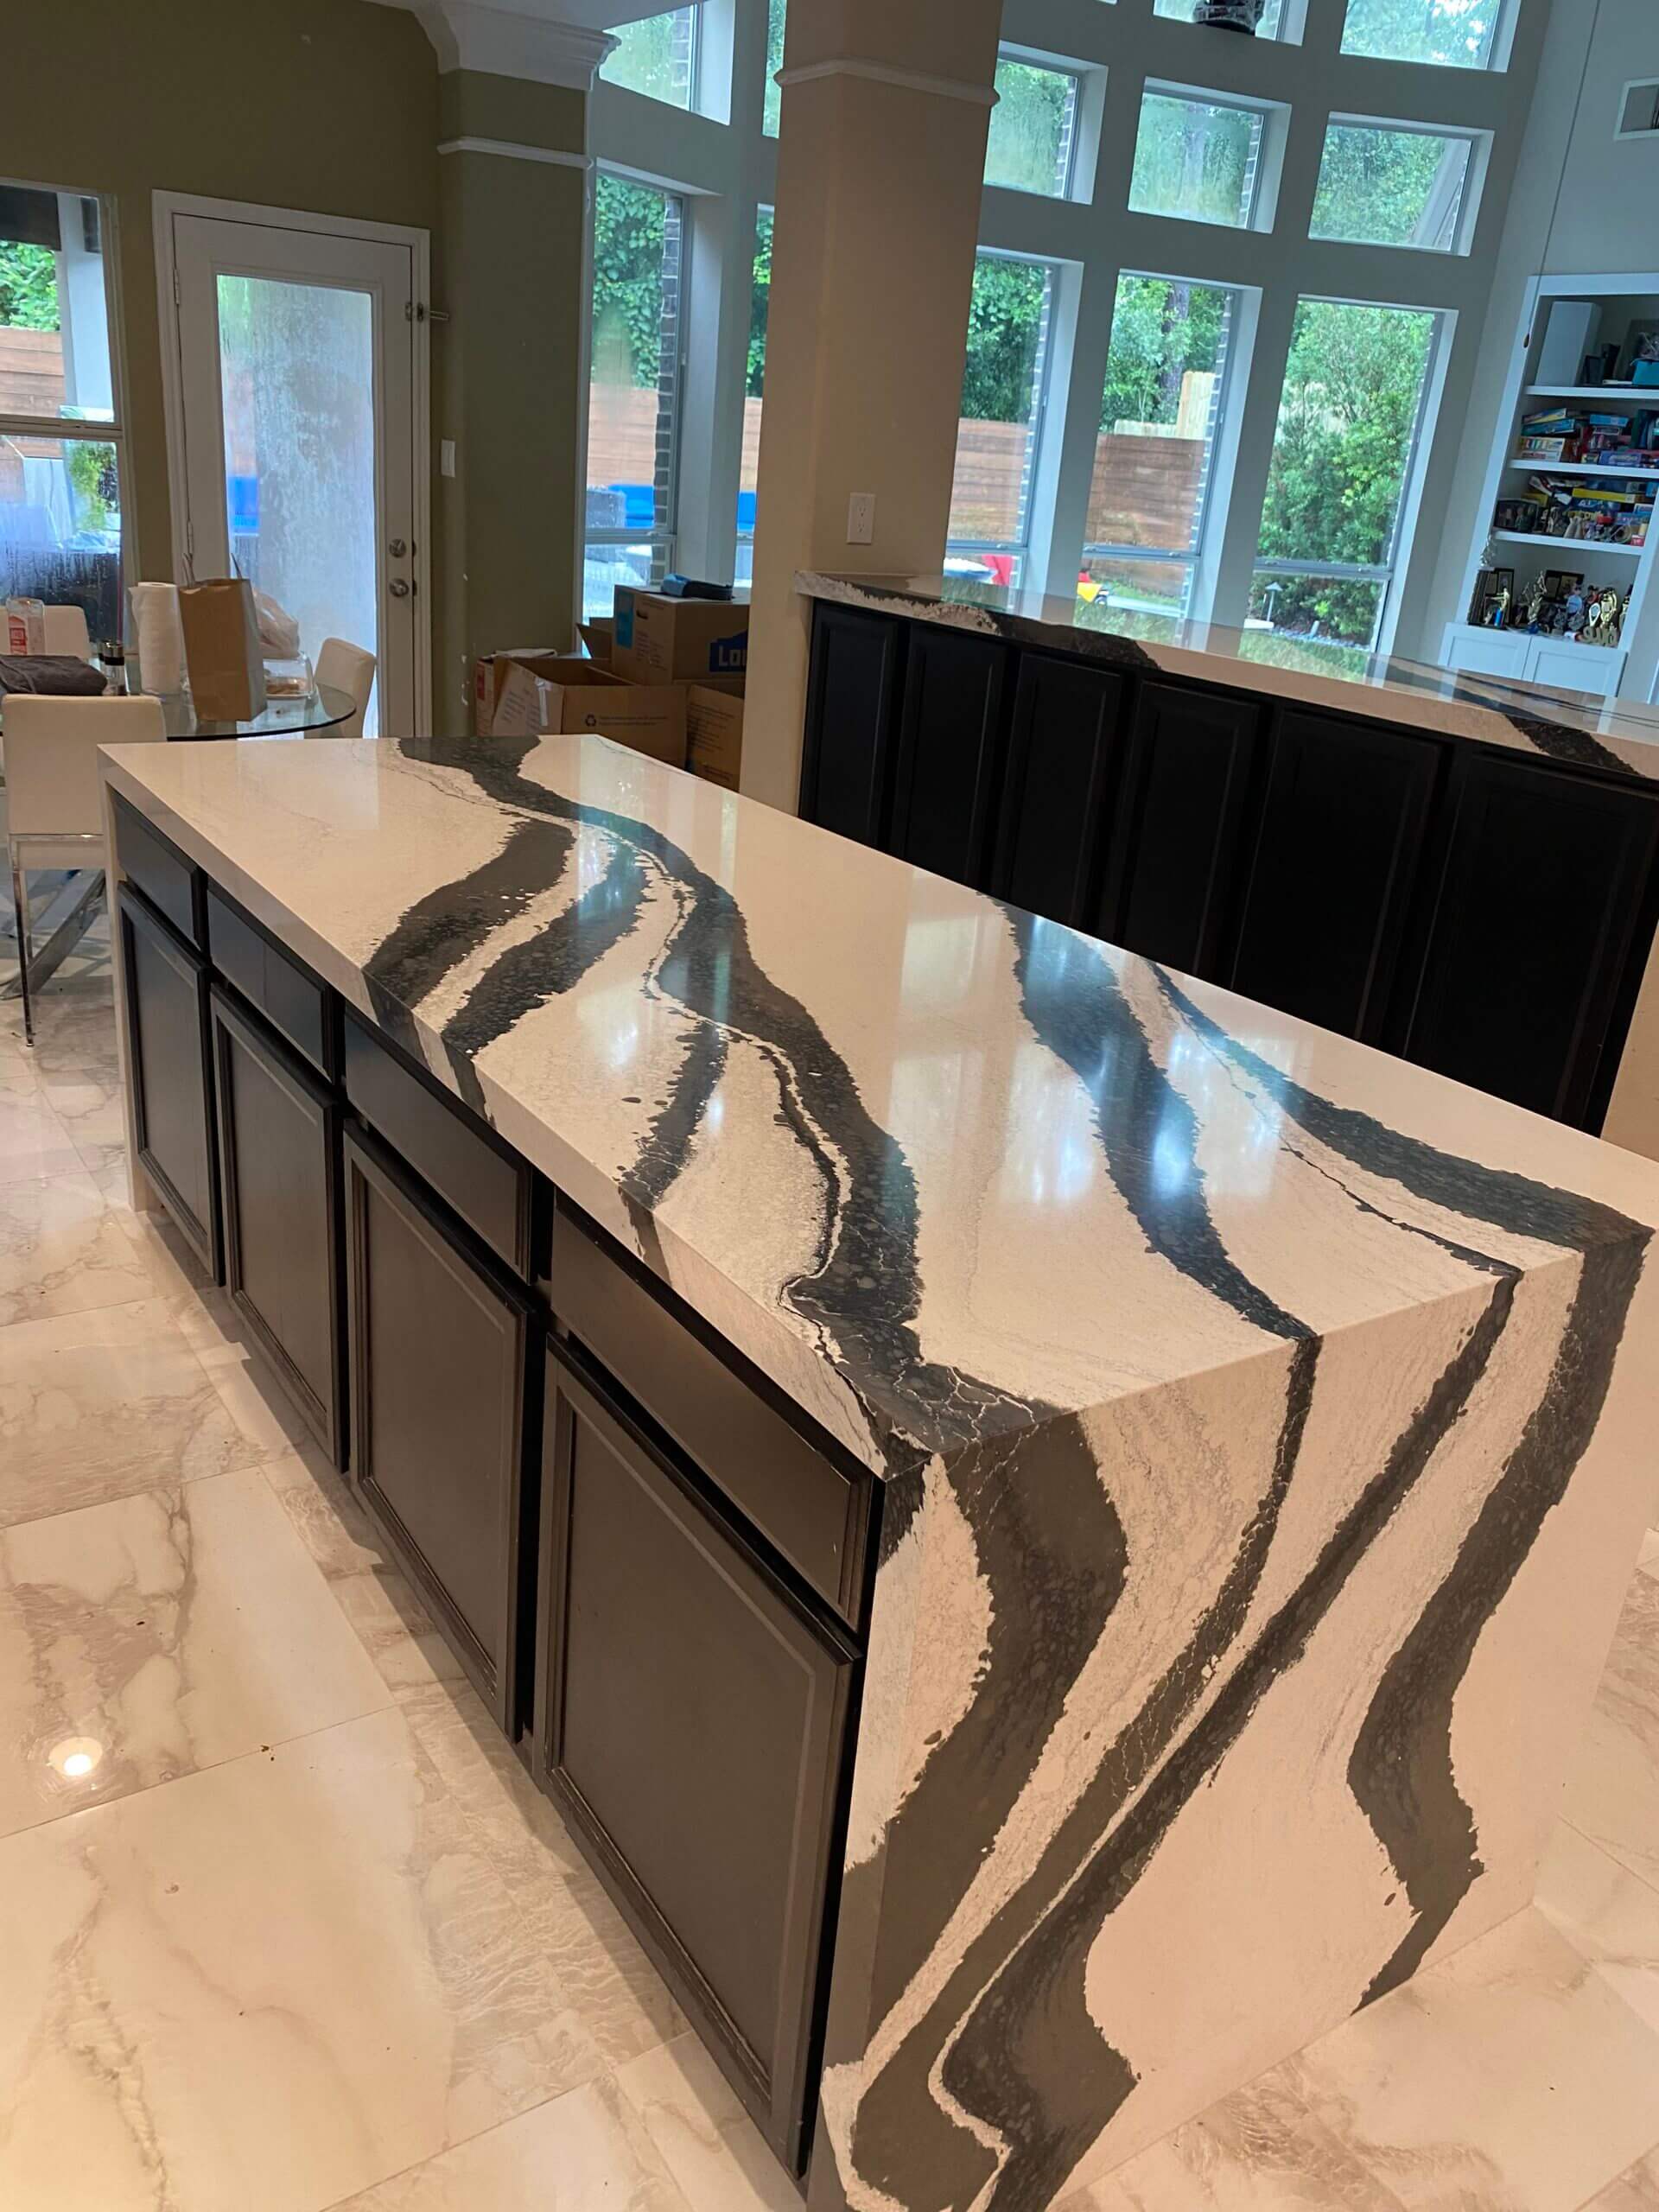 A kitchen counter with white and black lining